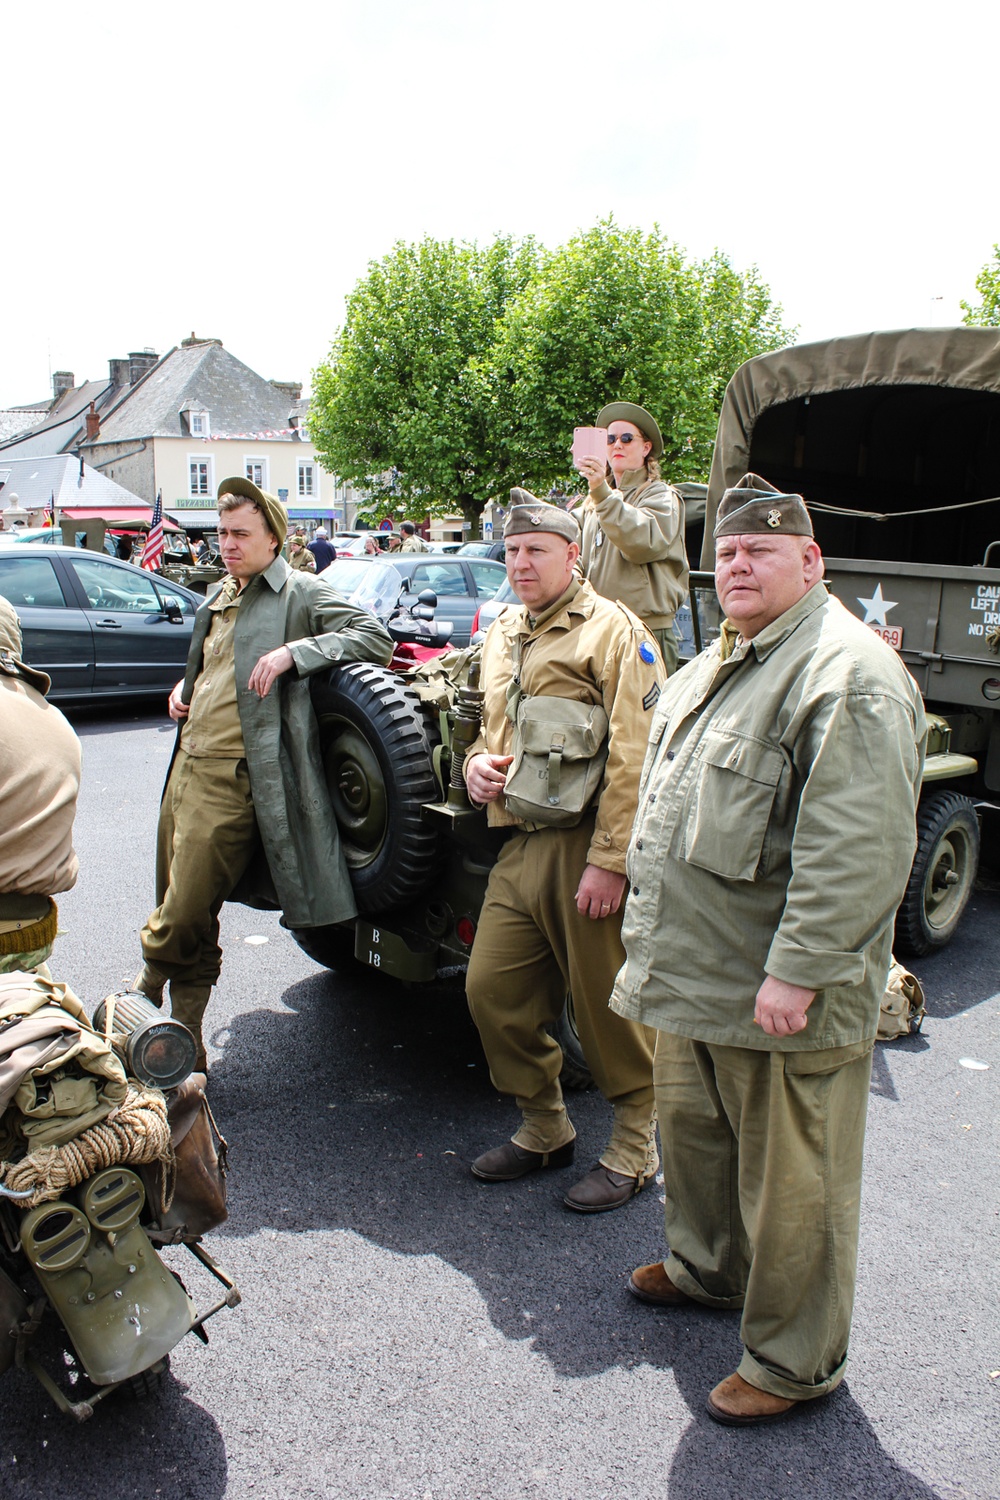 Air Guard aircrew participates in 70th anniversary of D-Day celebrations